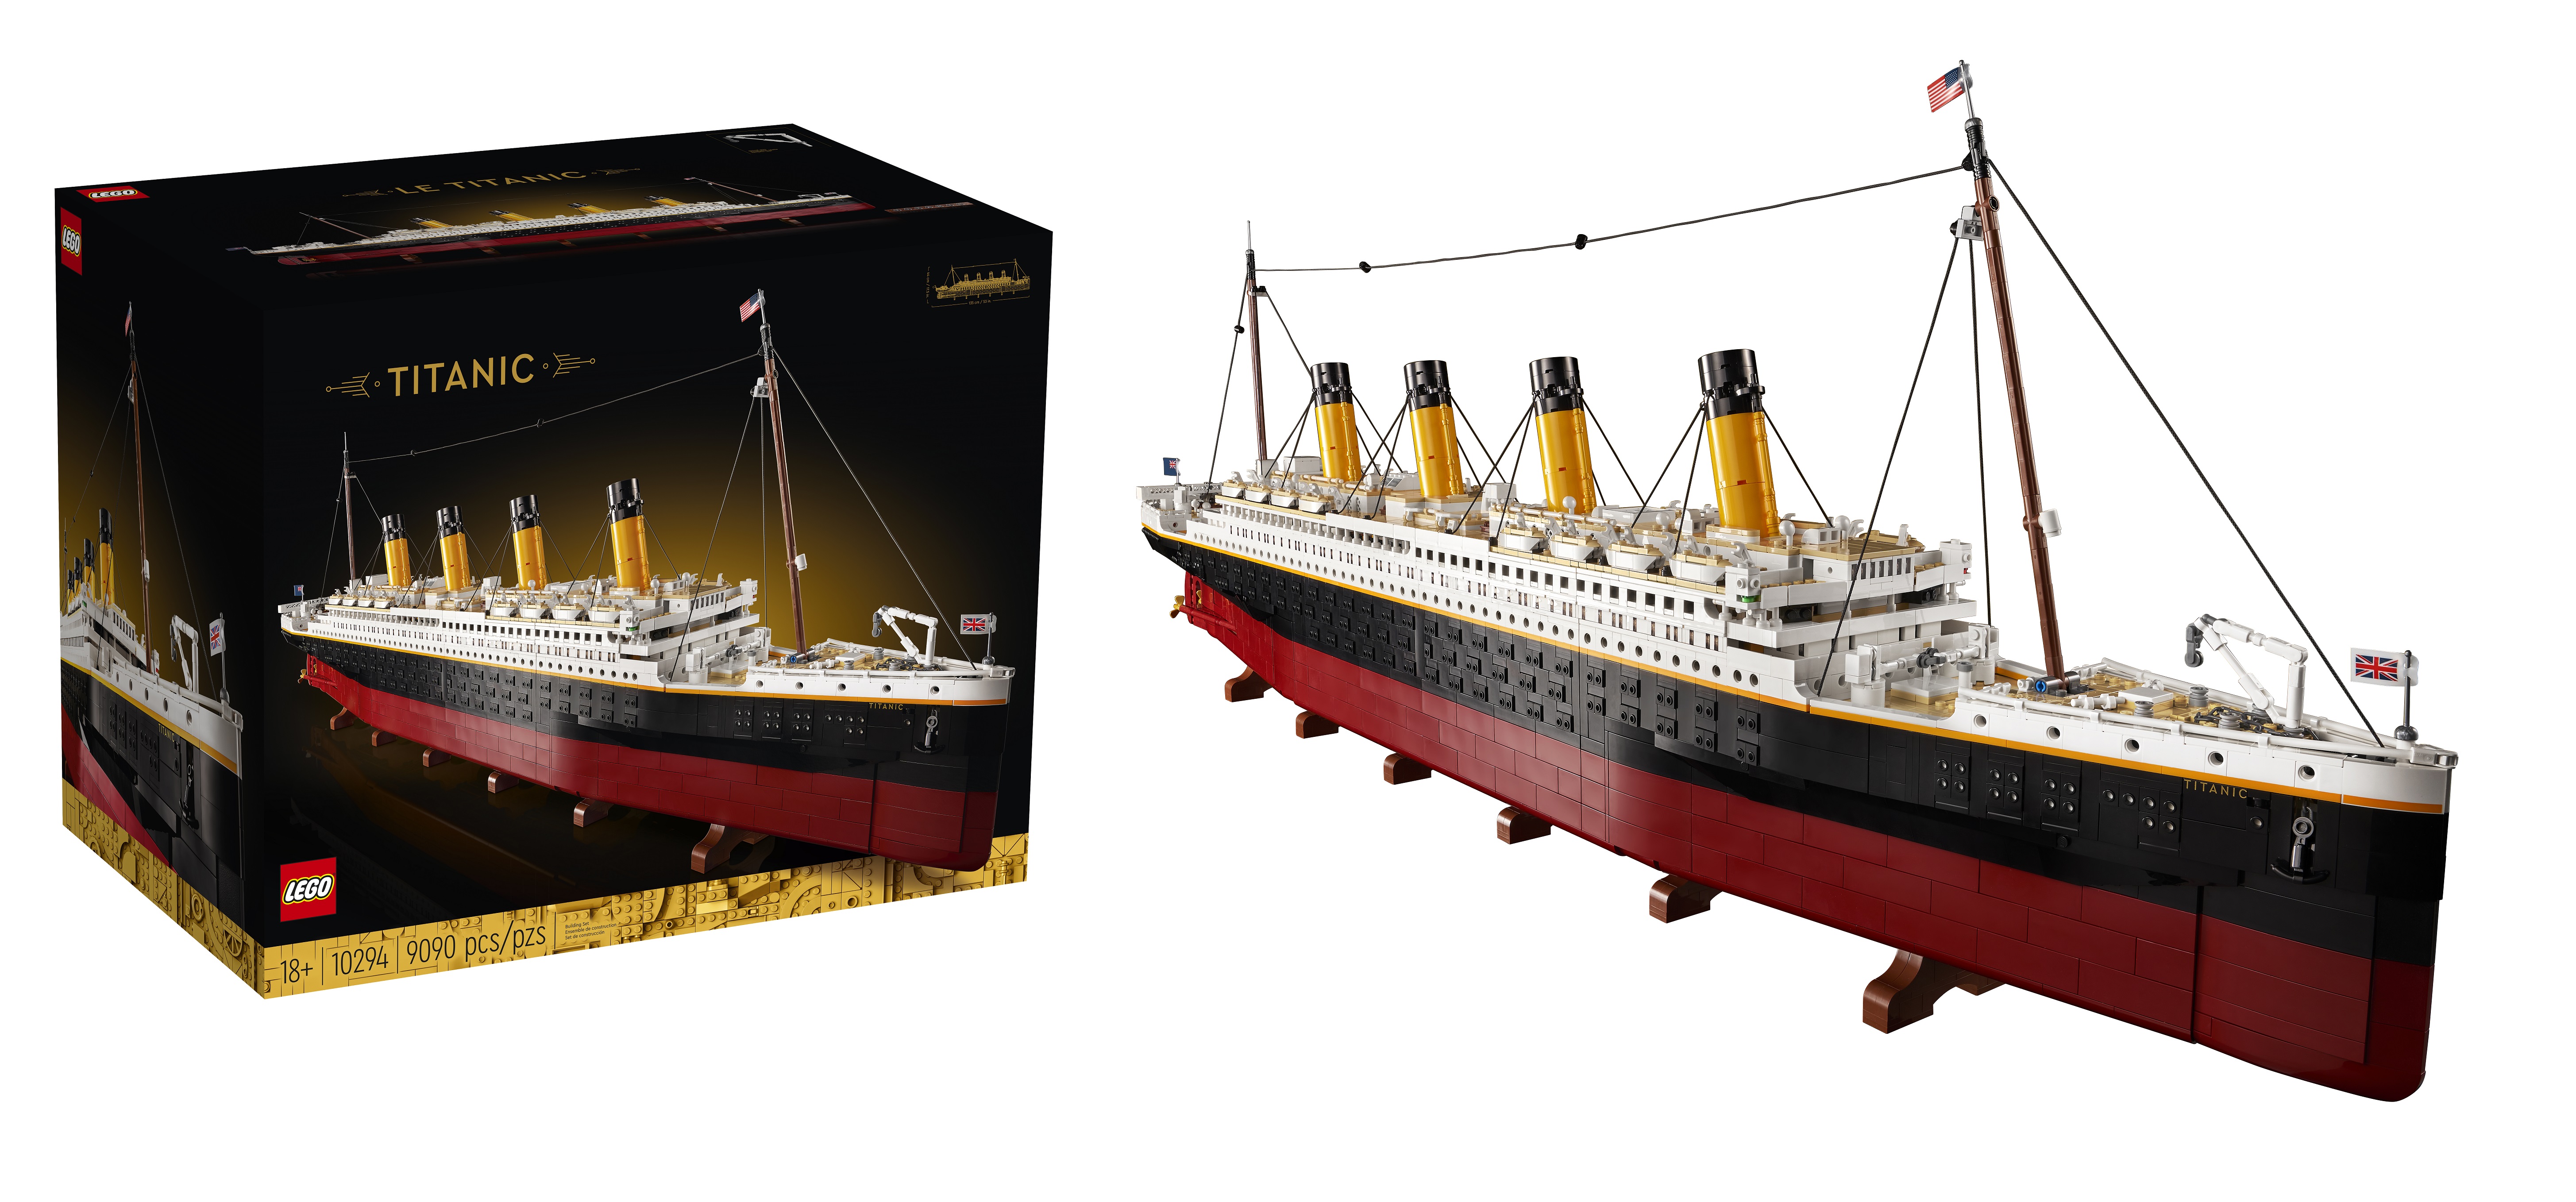 The LEGO Titanic 10294 officially revealed - 9,090 pieces and over   long! - Jay's Brick Blog